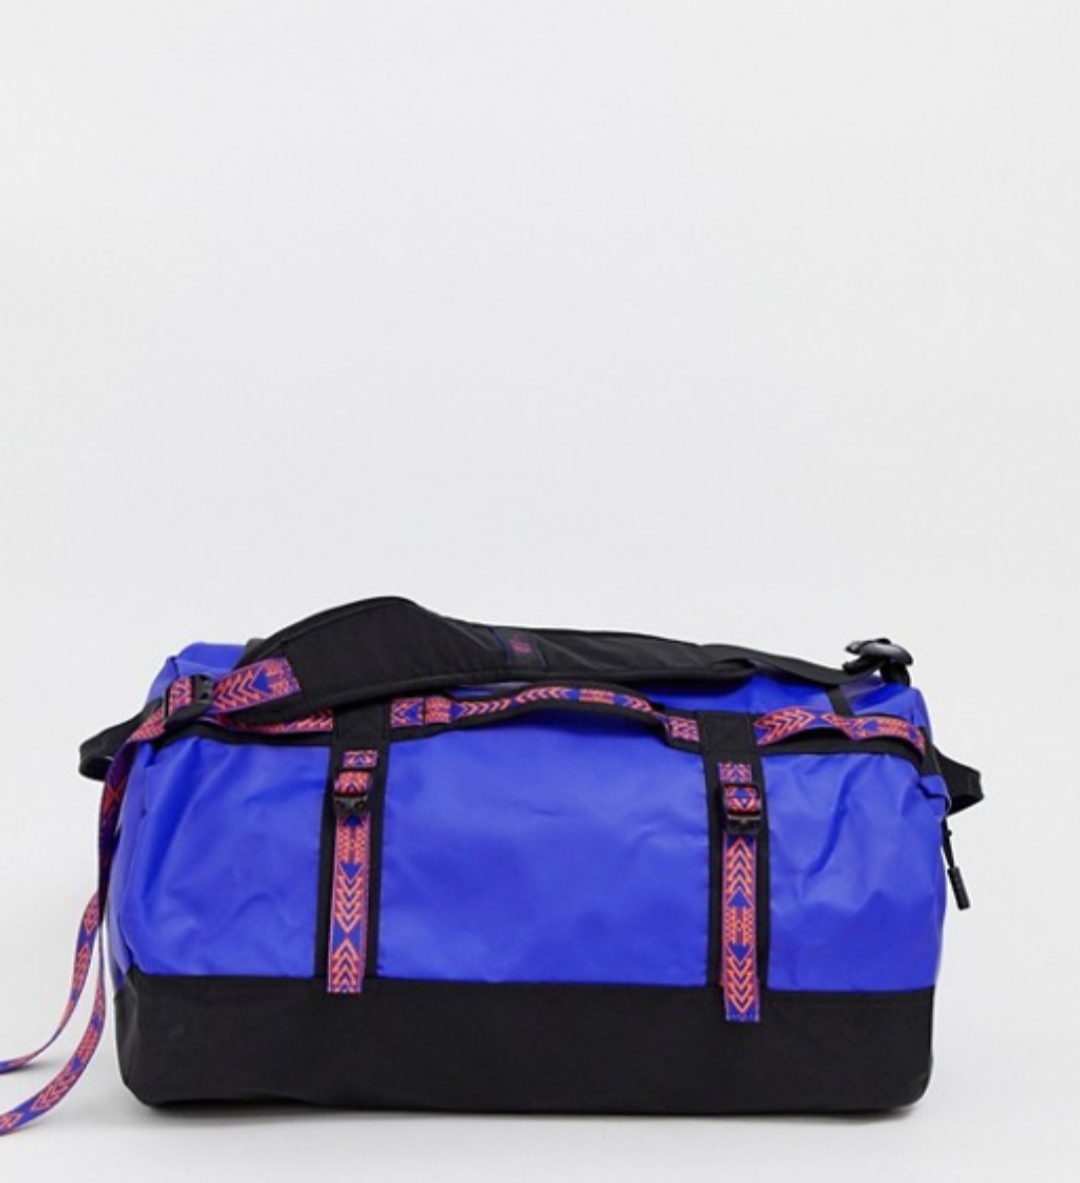 The North Face 92 Rage Collection duffle bag